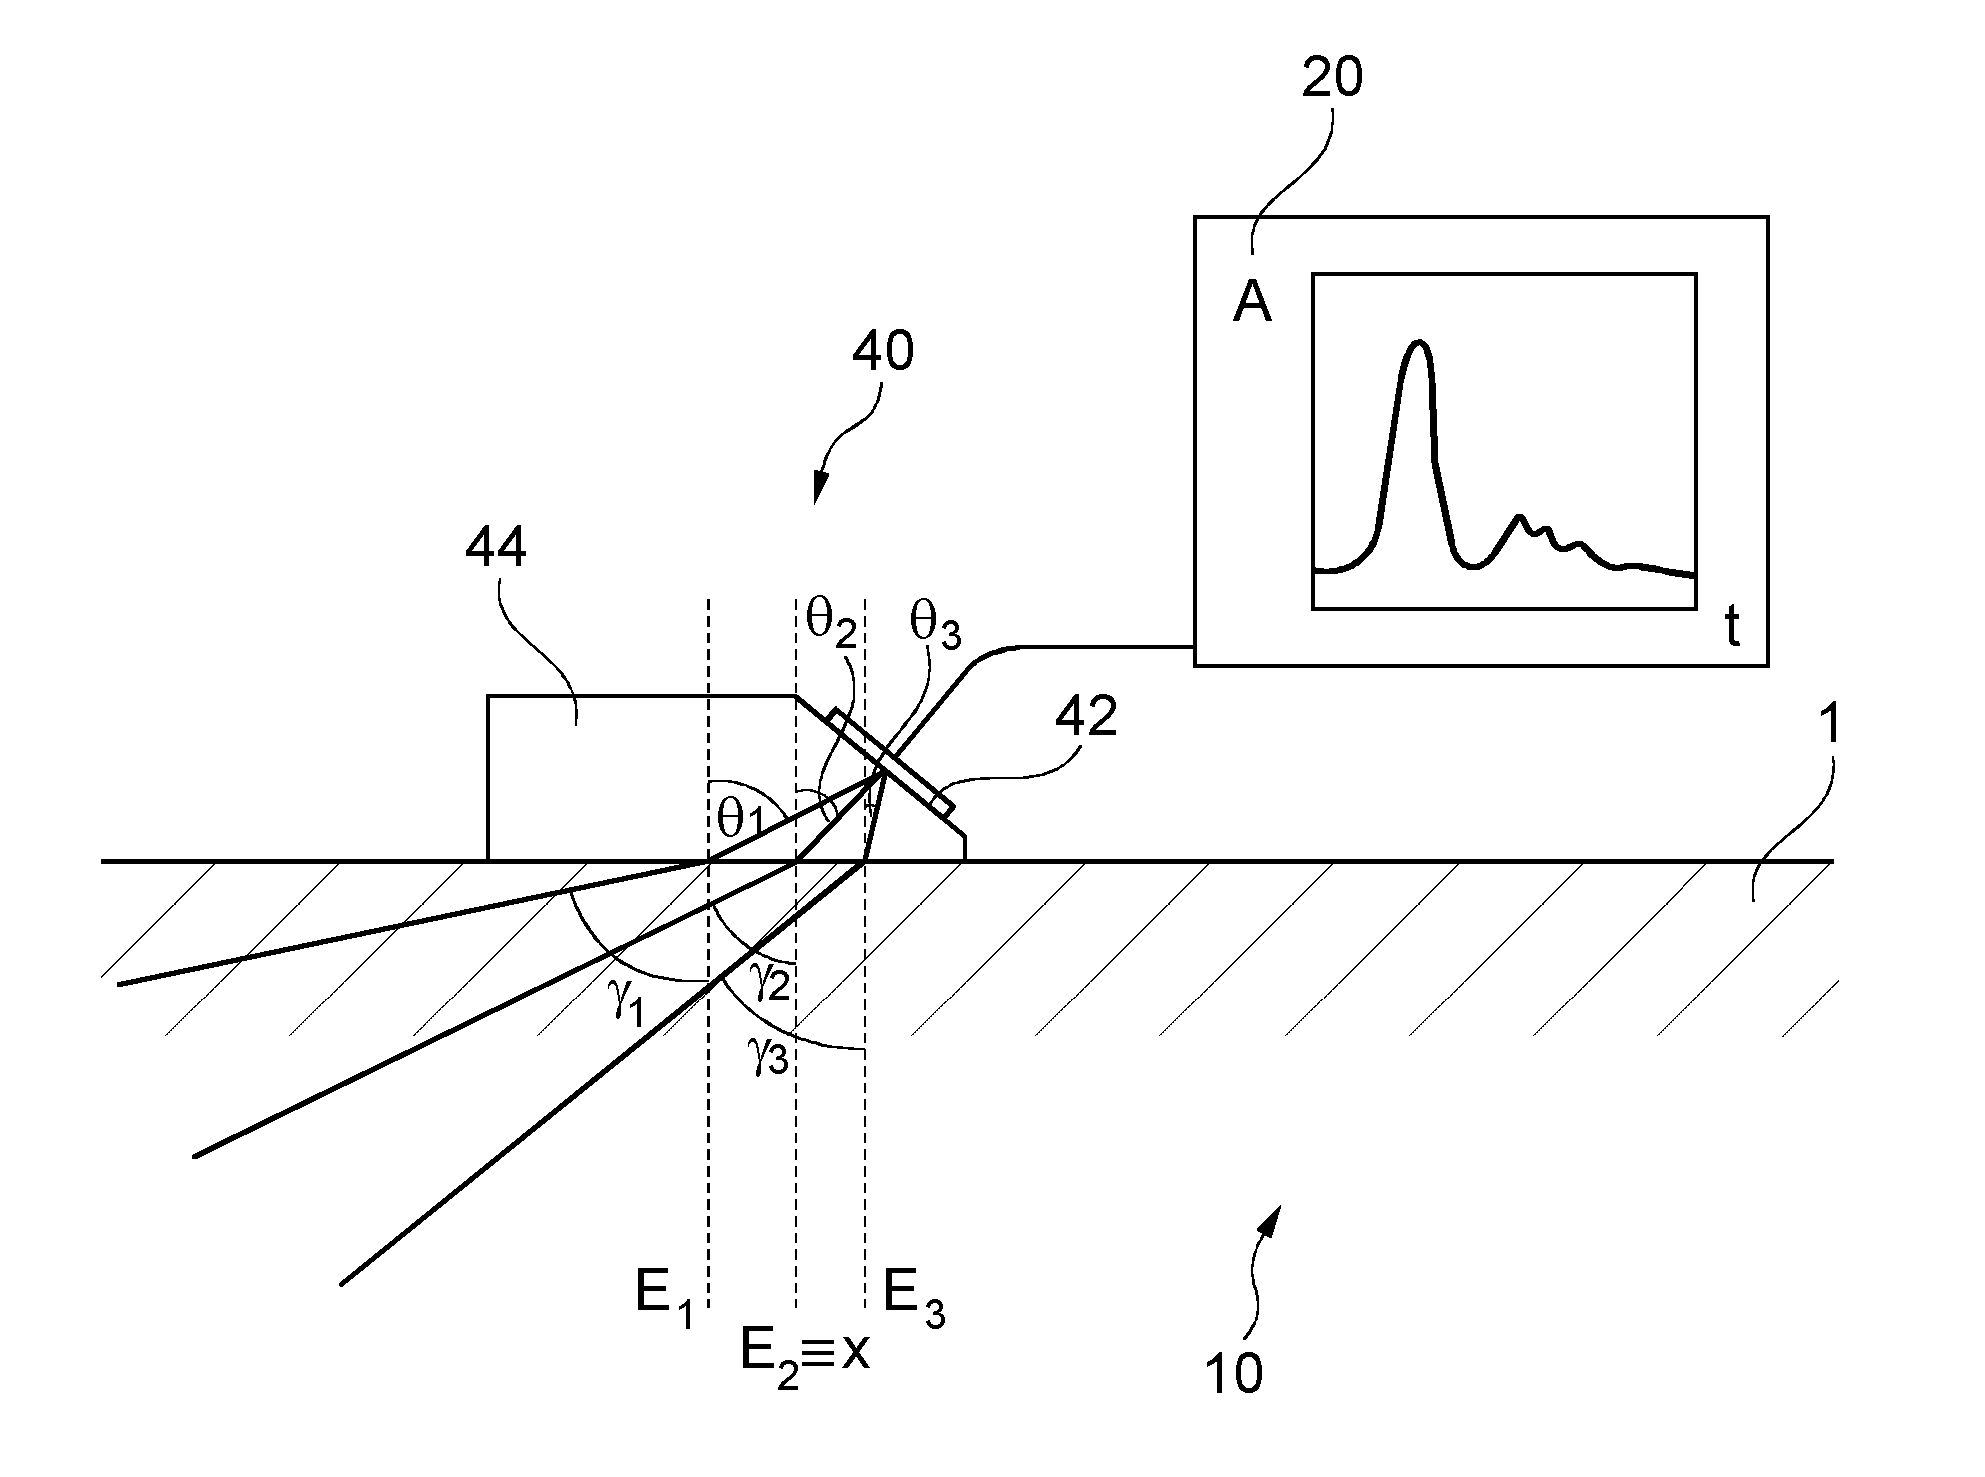 Method and device for the non-destructive inspection of a rotationally symmetric workpiect having sections with difference diameters